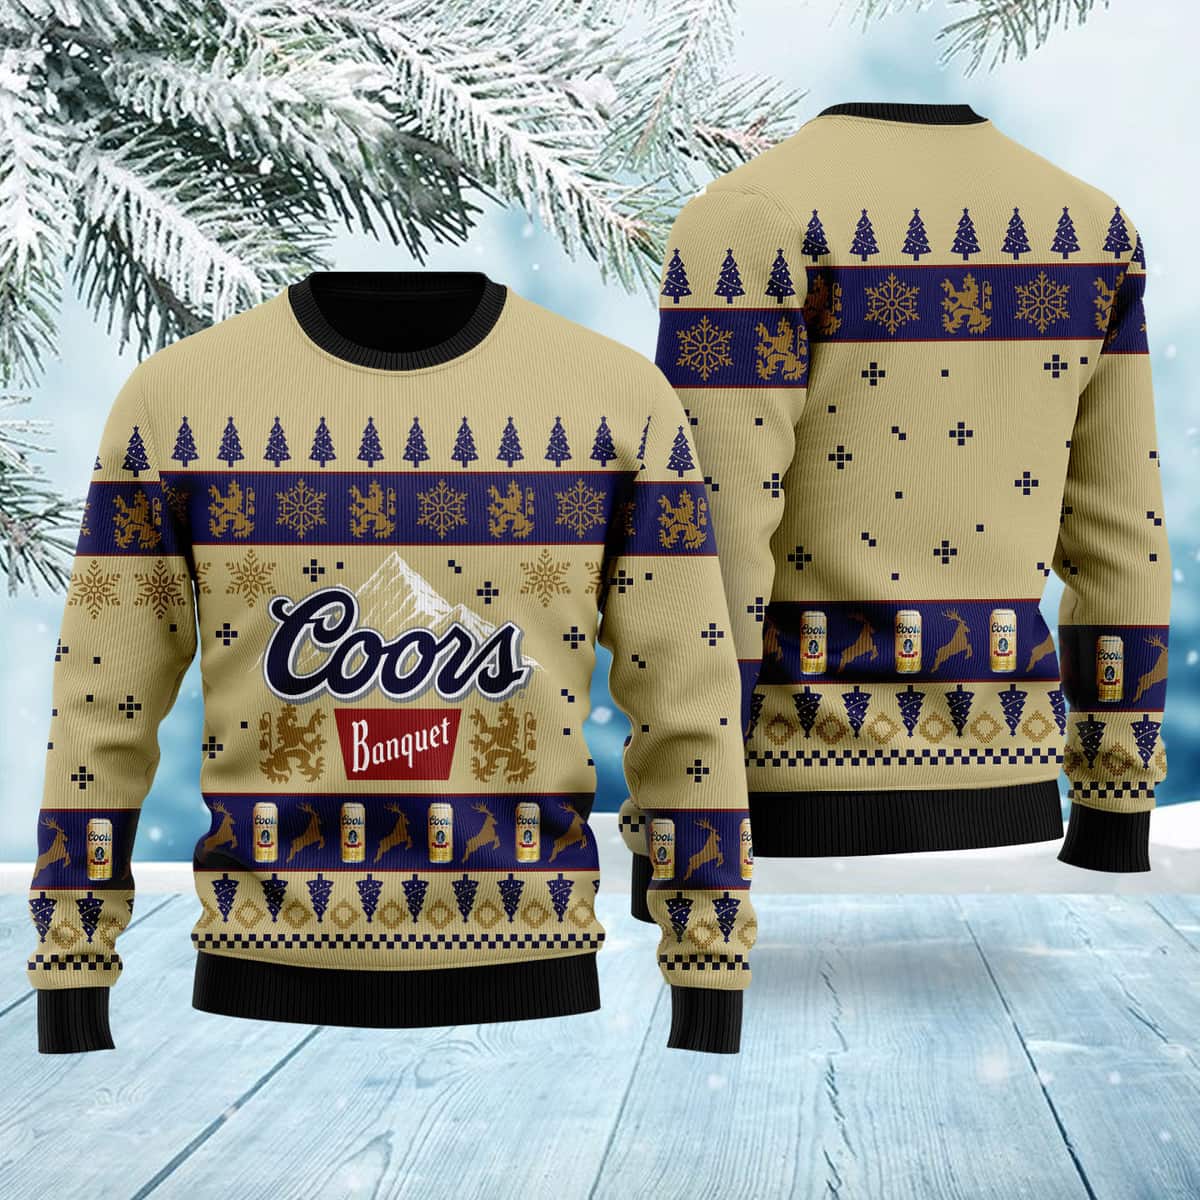 Coors Banquet Ugly Christmas Sweater Gift For Beer Drinkers 